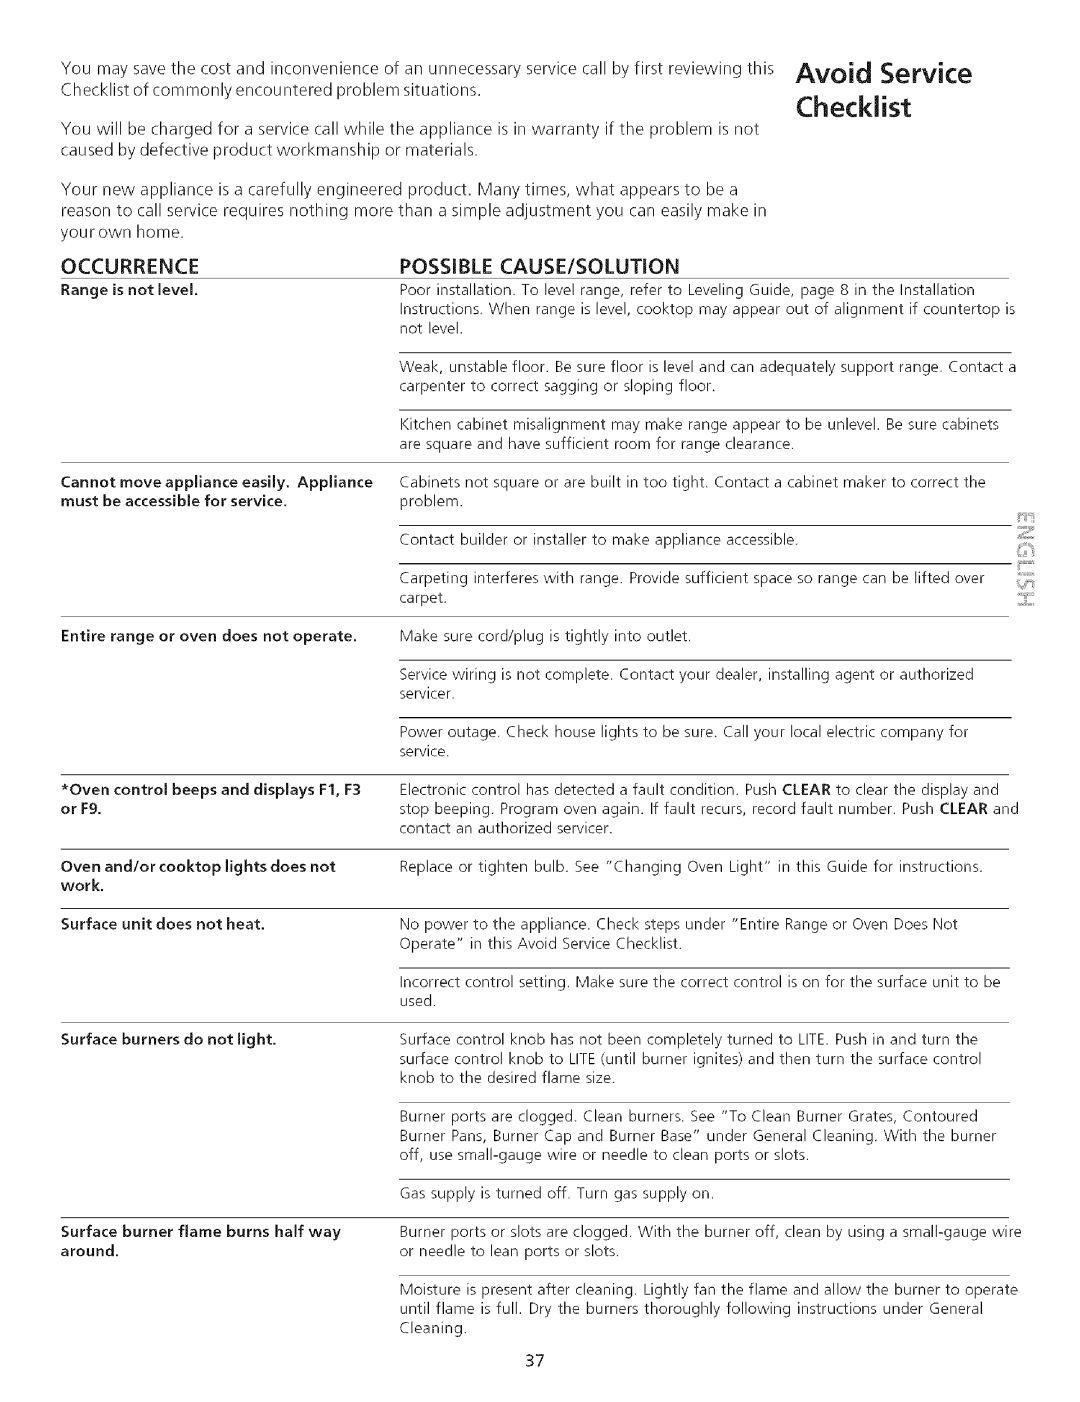 Kenmore 790.75503 manual Avoid Service Checklist, Occurrence, Possible, Cause/Solution 